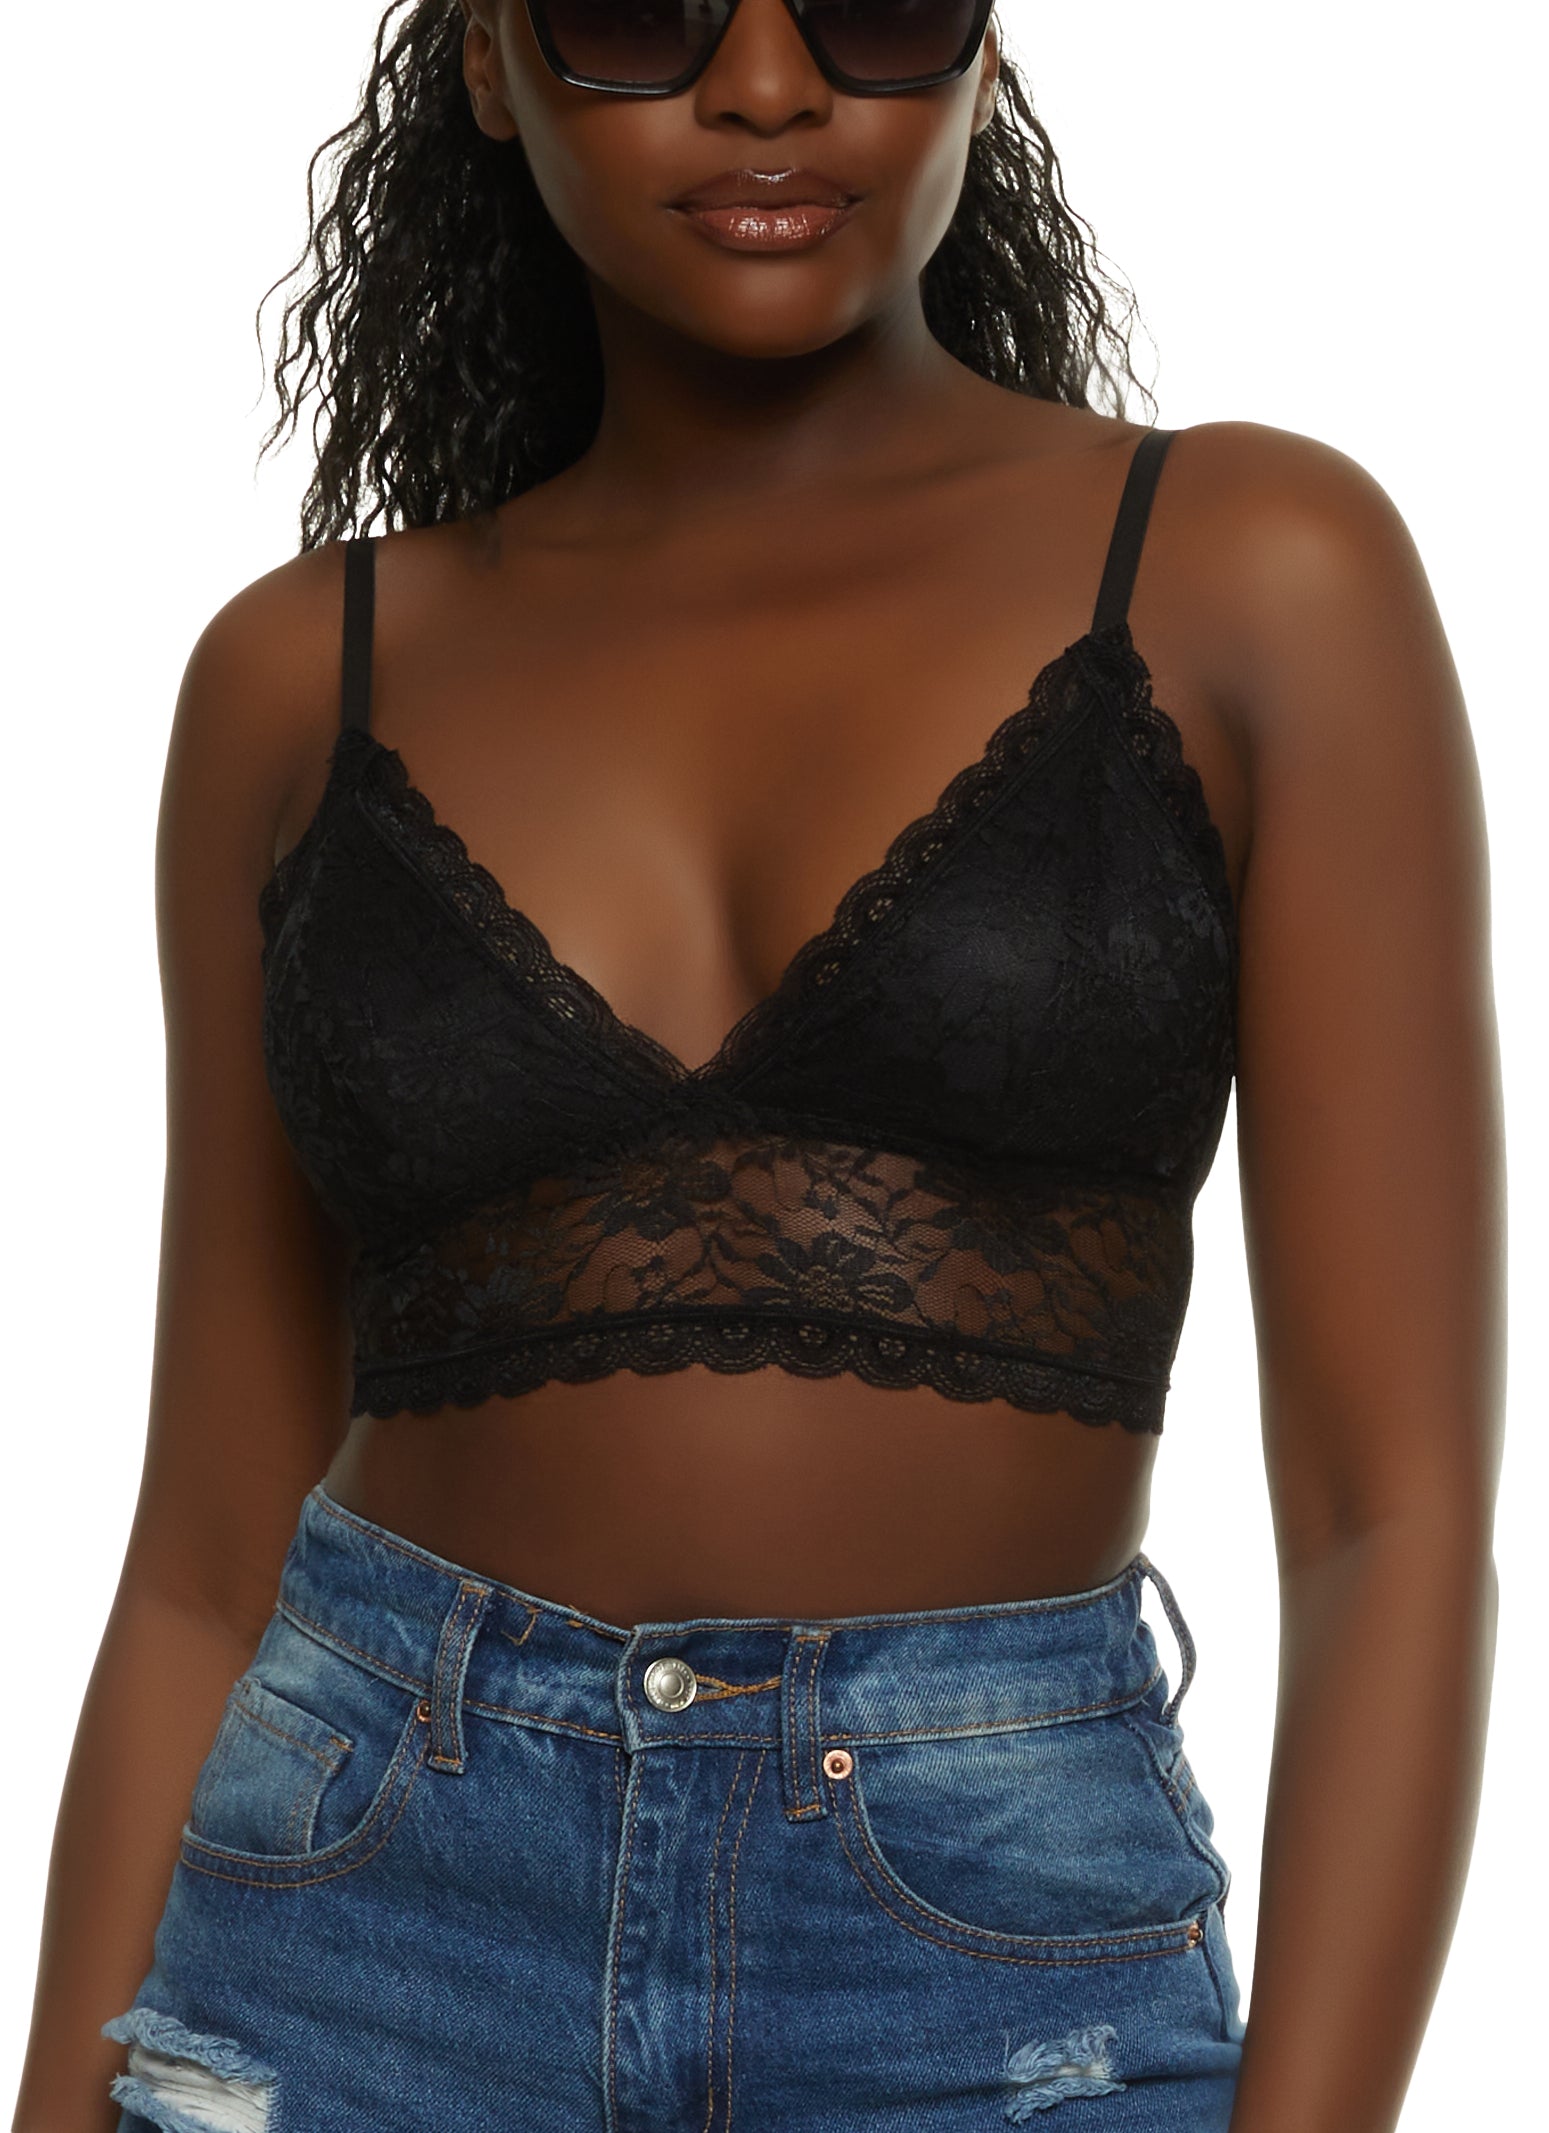 Rainbow Shops Womens Floral Lace Padded Bralette, Black, Size M